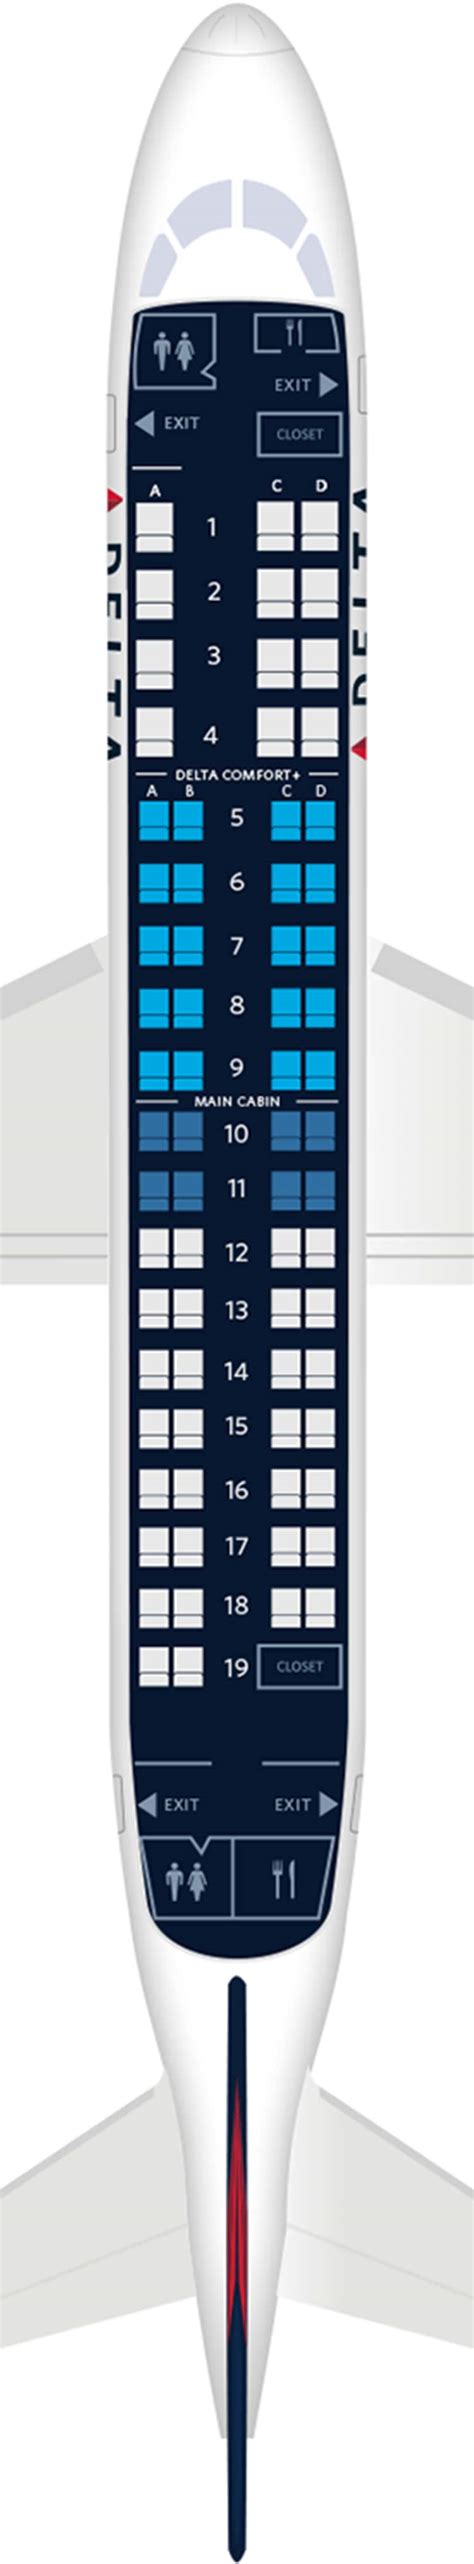 Jan 26, 2023 · Airbus A319. Airbus A320. Airbus A320 neo. Airbus A321 187pax. Detailed seat map American Airlines Embraer ERJ 175 V1. Find the best airplanes seats, information on legroom, recline and in-flight entertainment using our detailed online seating charts. . 